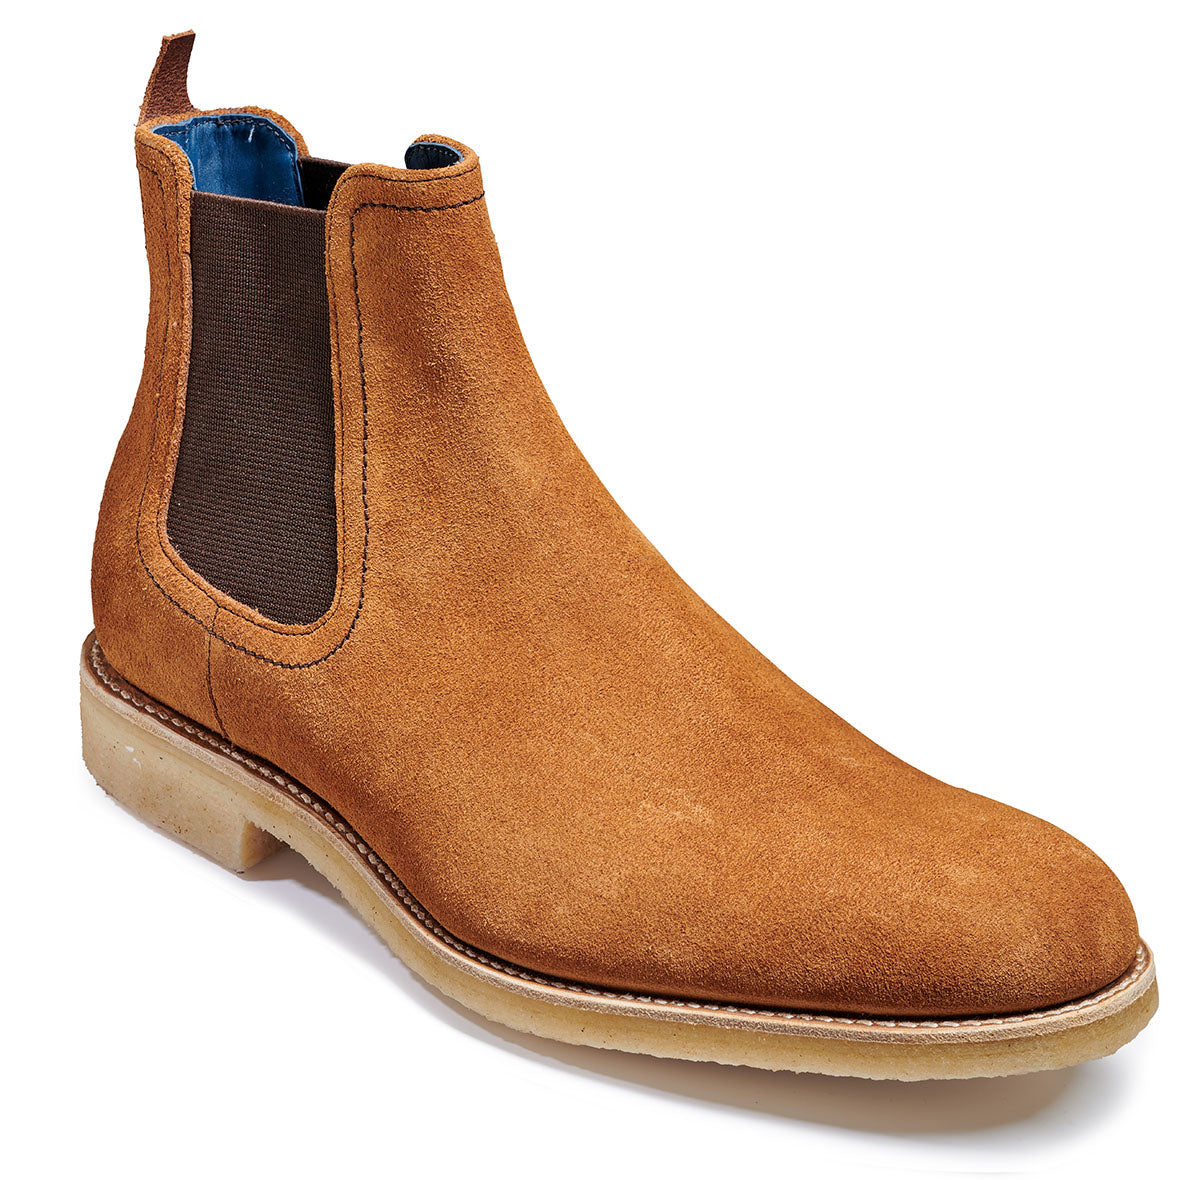 Freddie - Men's Suede Leather Chelsea Boots From Barker